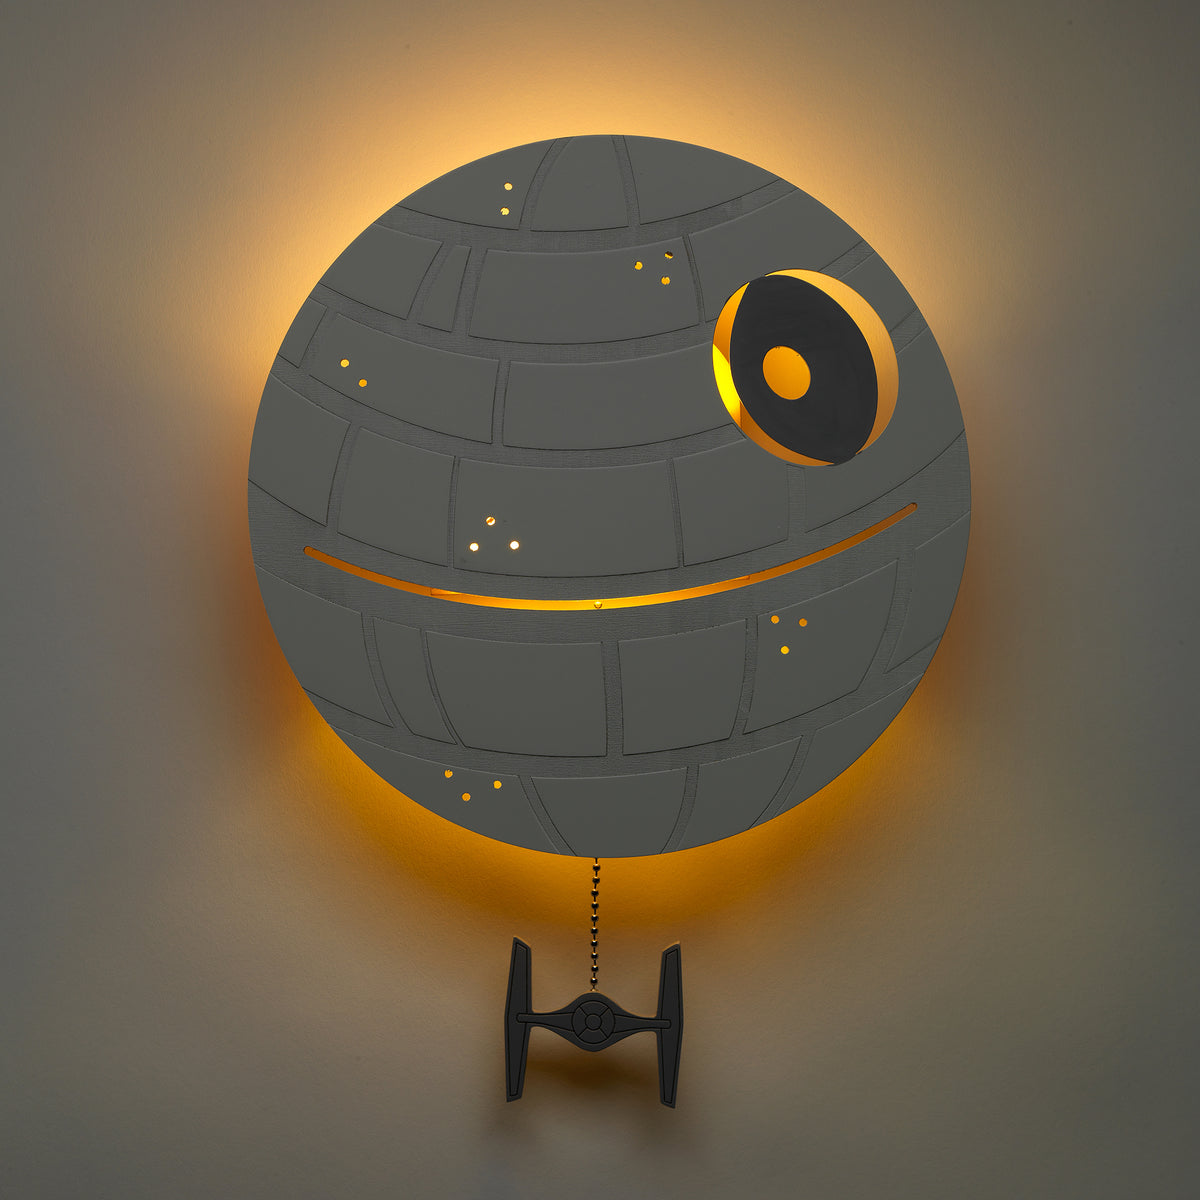 Star Wars Death Star Inspired Christmas Tree Ornament with LEDs and On/Off  Switch